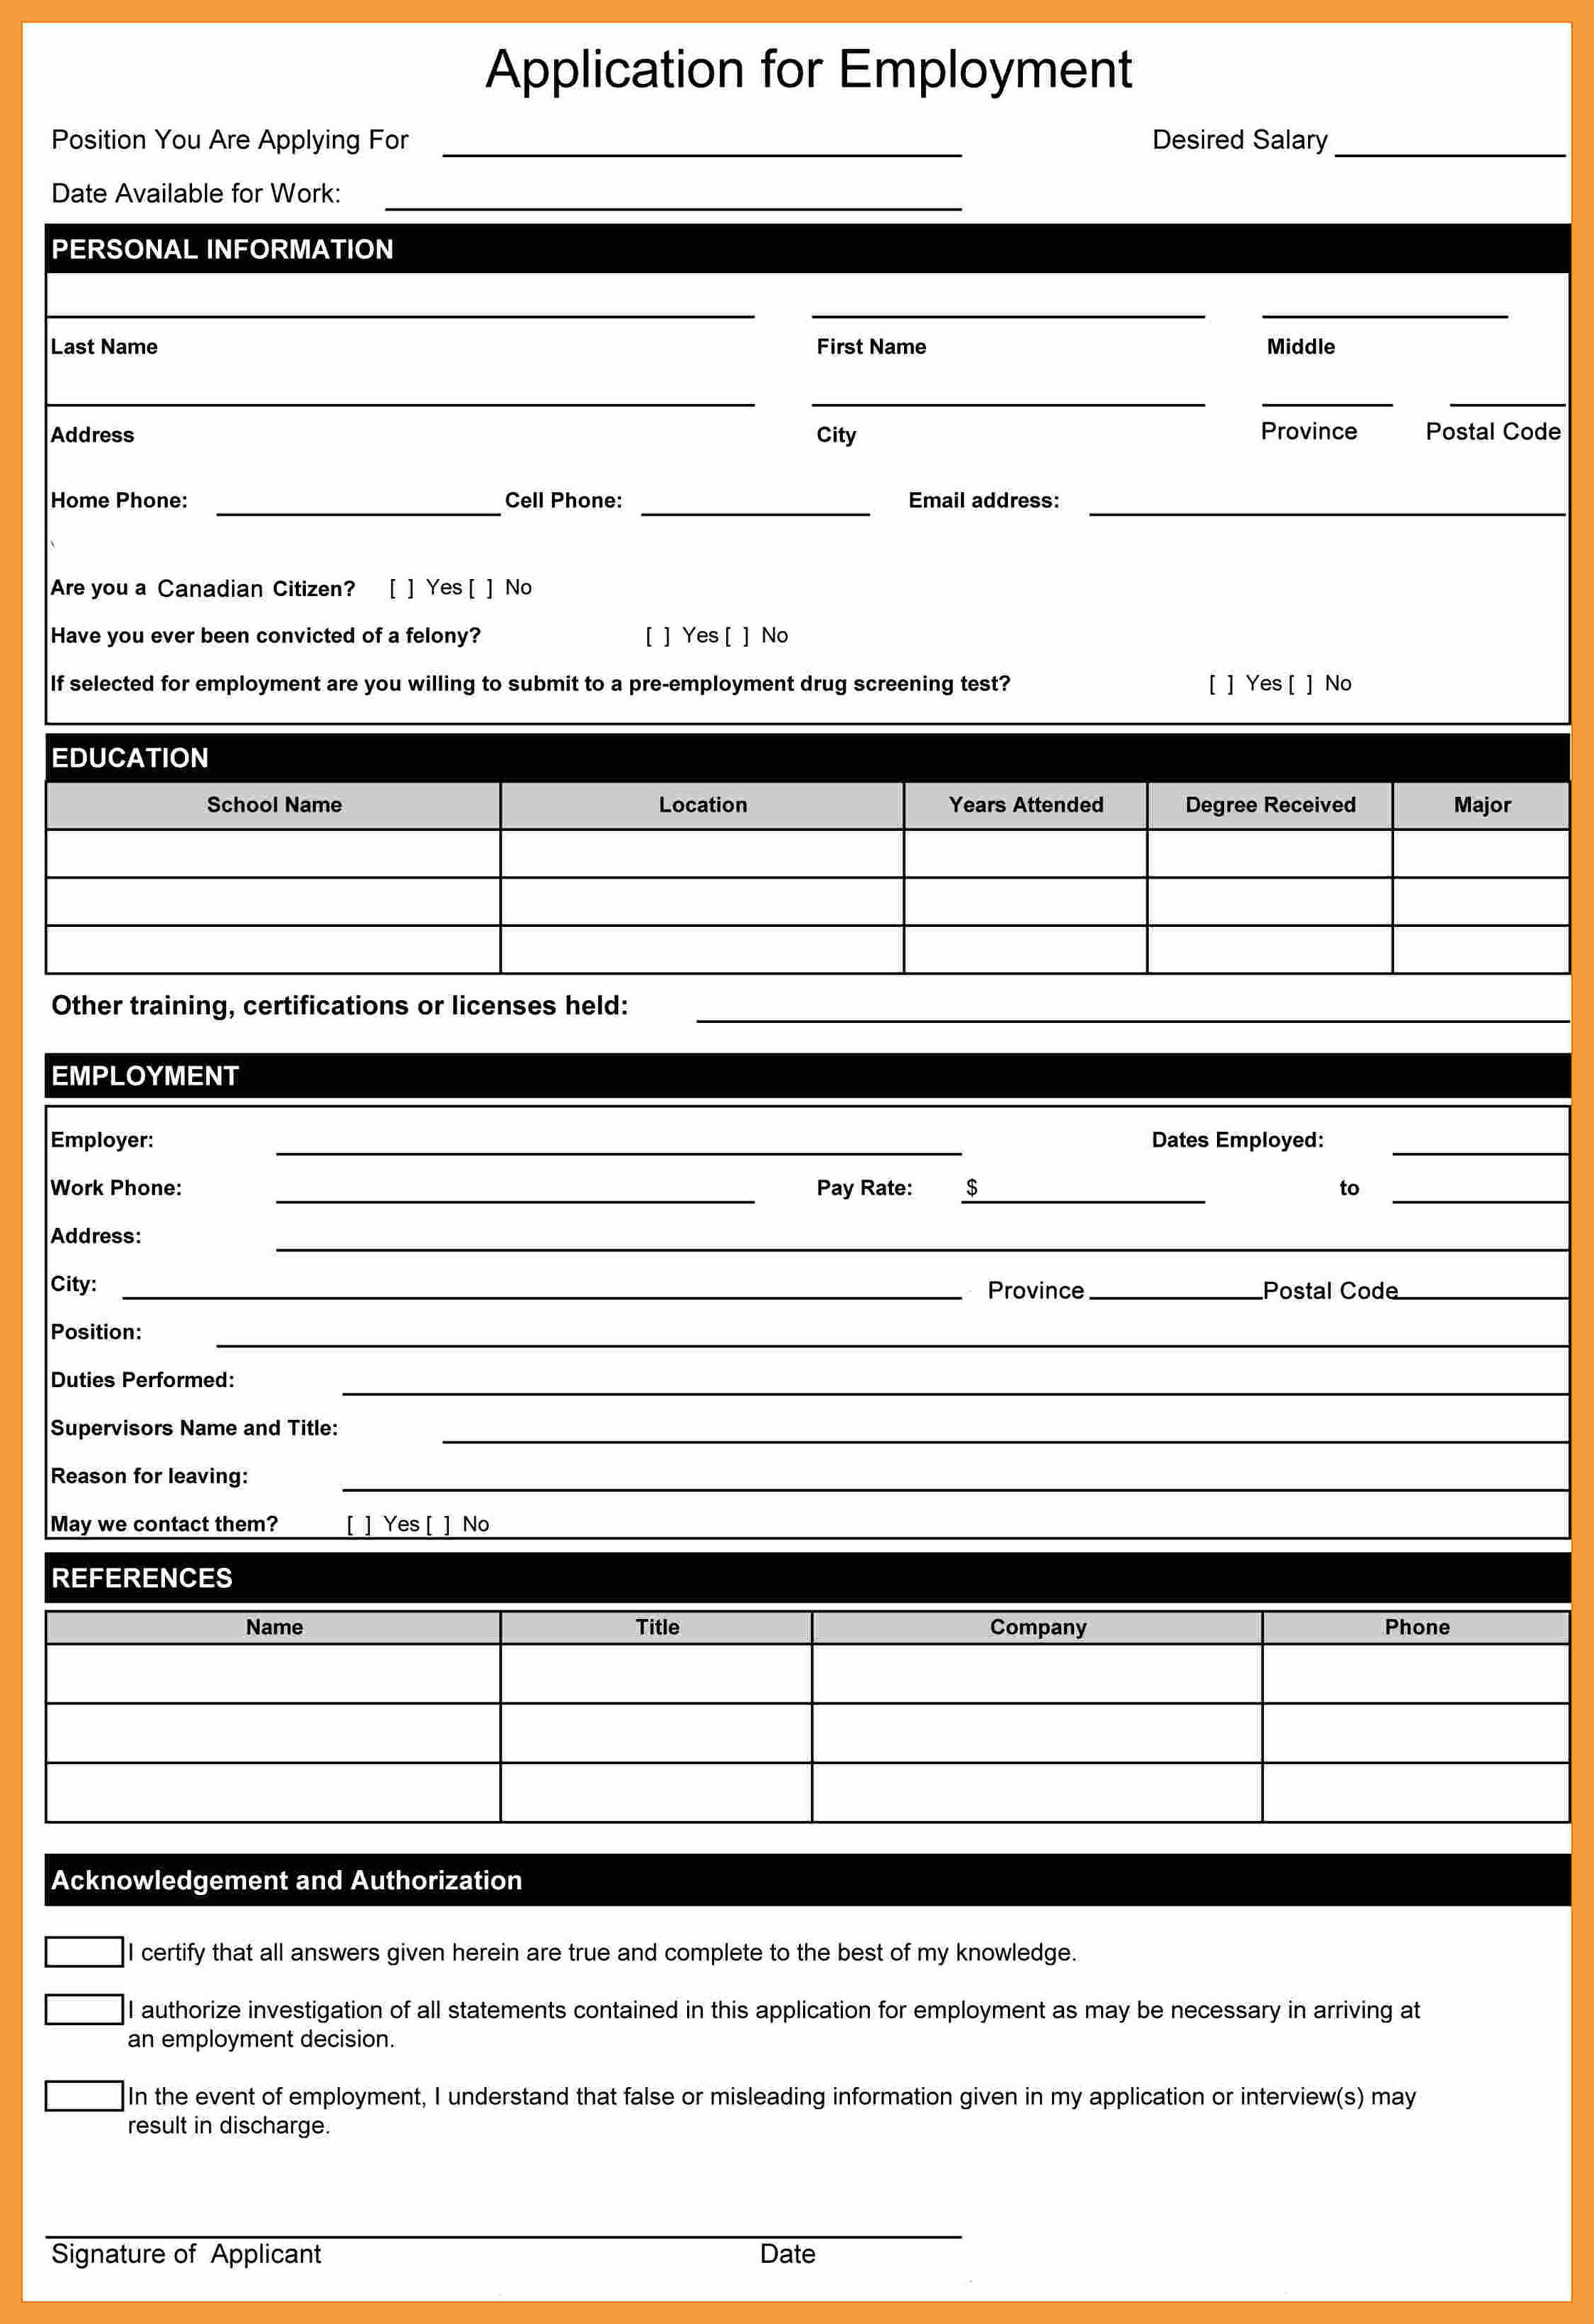 application for employment form example1